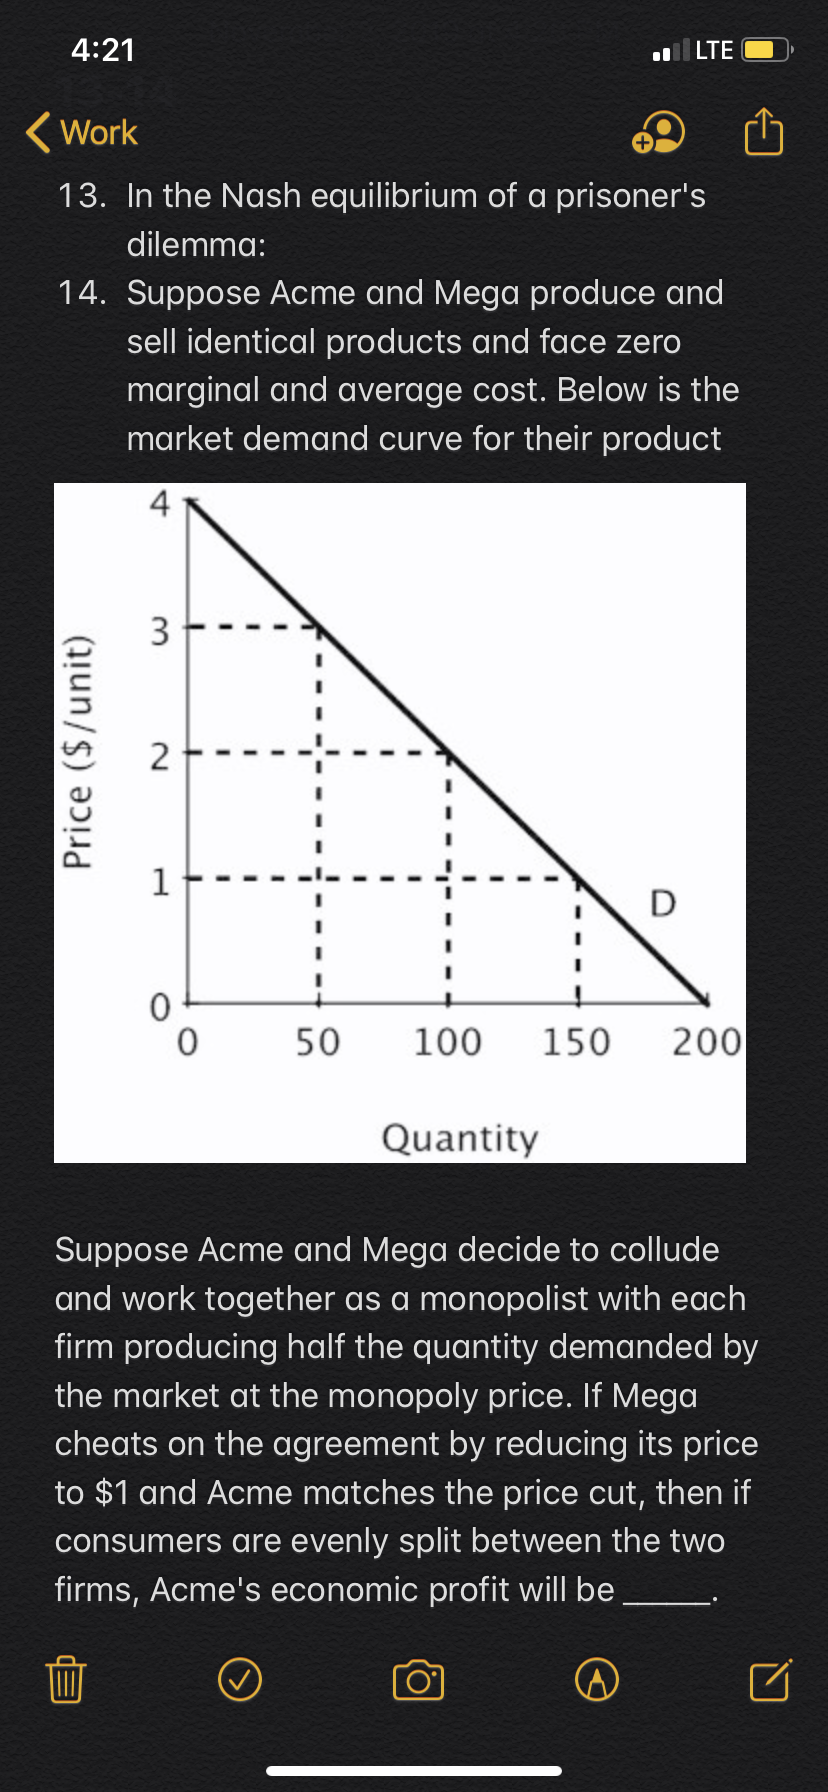 4:21
lLTE
Work
13. In the Nash equilibrium of a prisoner's
dilemma:
14. Suppose Acme and Mega produce and
sell identical products and face zero
marginal and average cost. Below is the
market demand curve for their product
4
3
2
D
0
0
50
200
100
150
Quantity
Suppose Acme and Mega decide to collude
and work together as a monopolist with each
firm producing half the quantity demanded by
the market at the monopoly price. If Mega
cheats on the agreement by red ucing its price
to $1 and Acme matches the price cut, then if
consumers are evenly split between the two
firms, Acme's economic profit will be
Price ($/unit)
